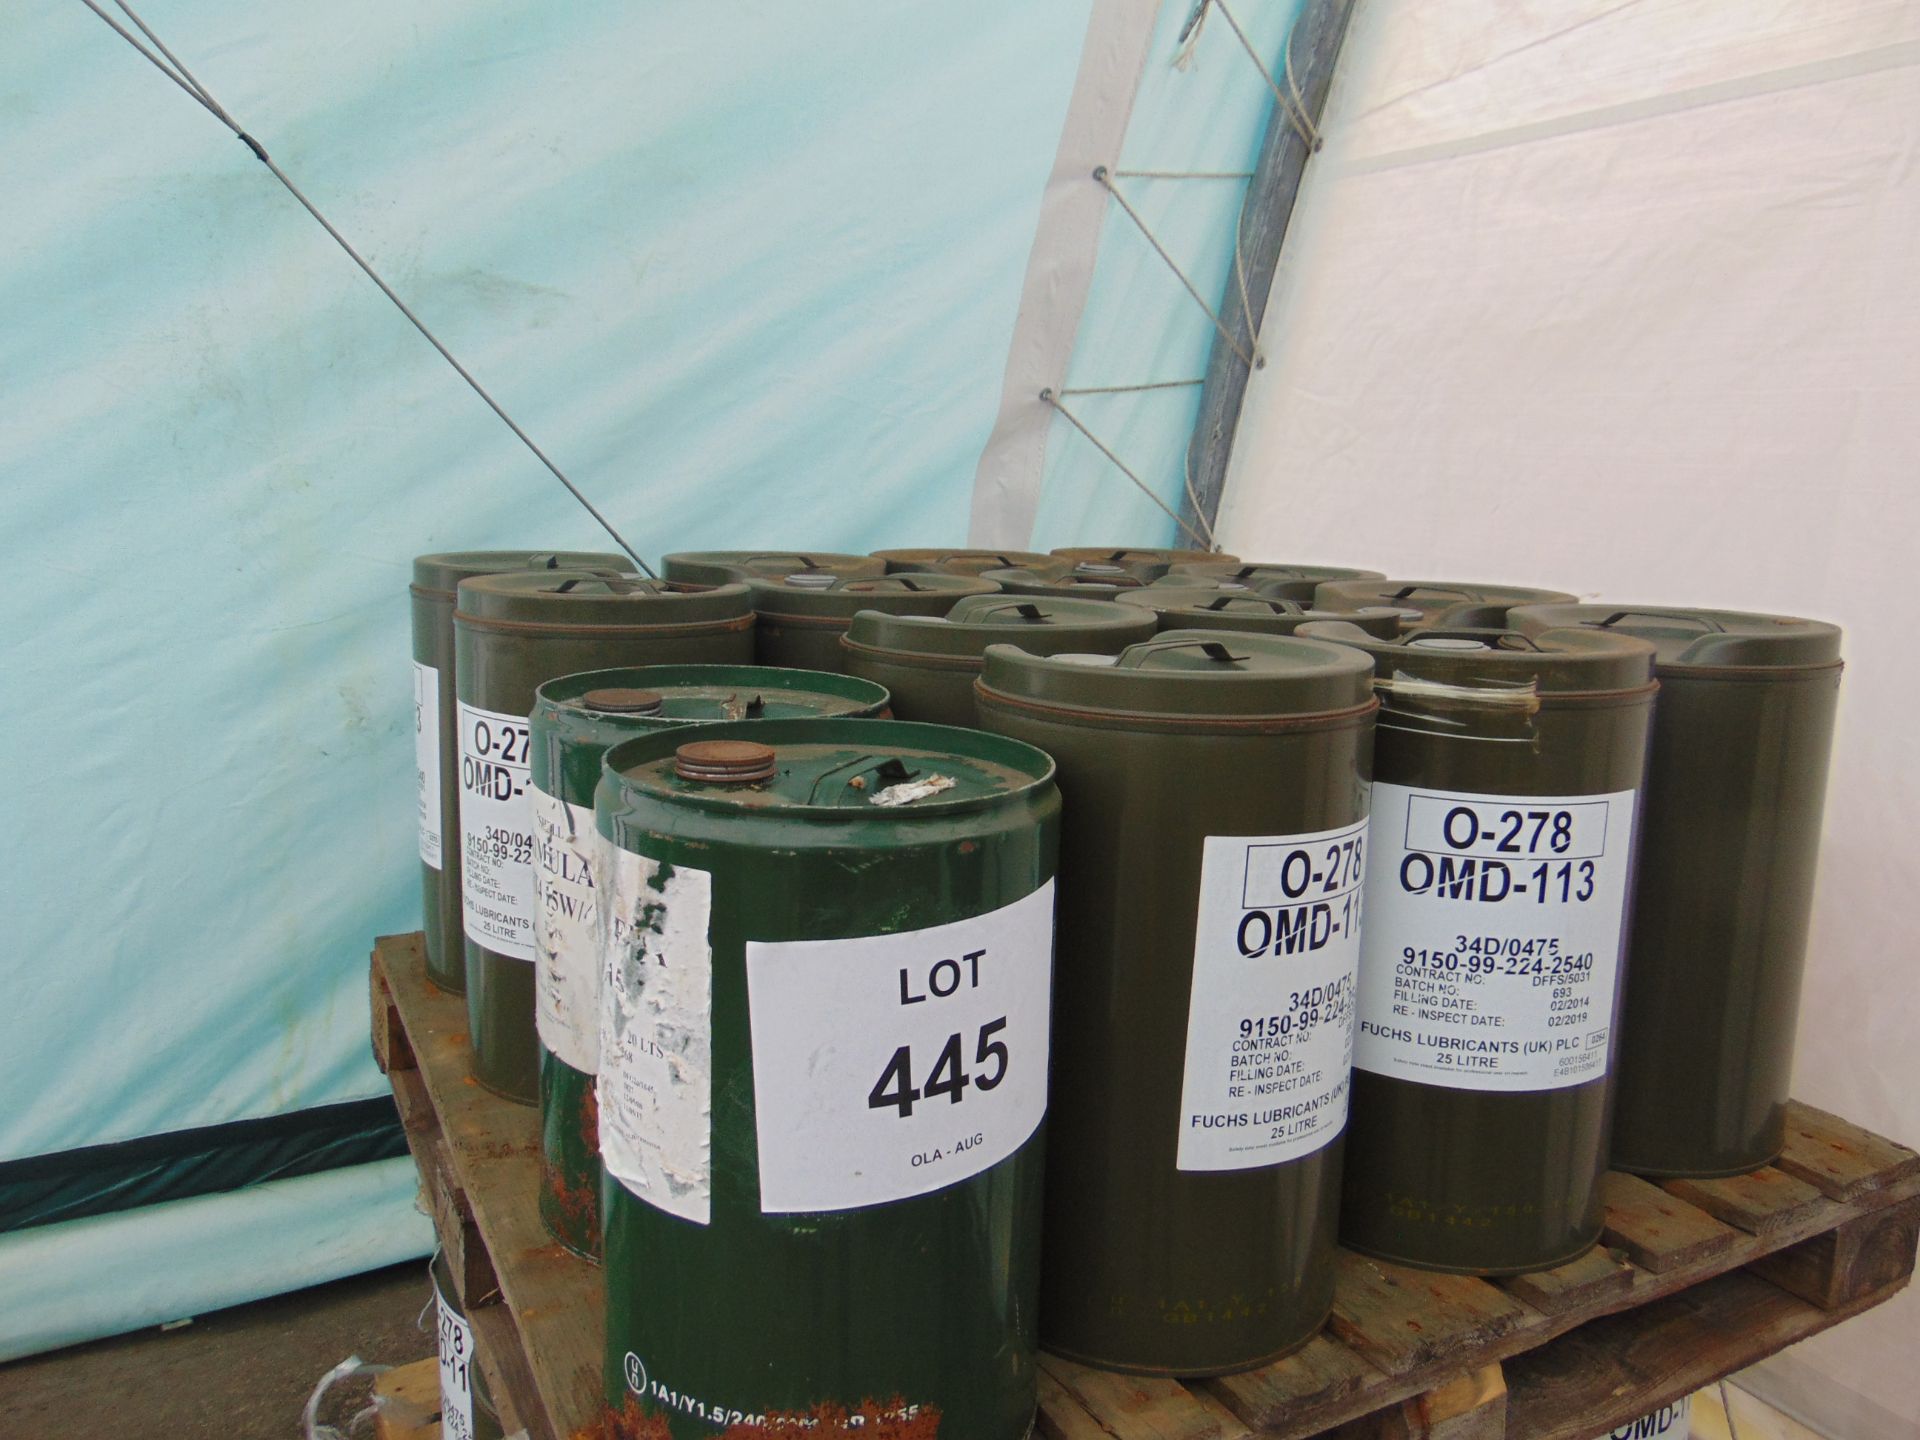 16 25 LITRE DRUMS OF UNISSUED OMD-113 VEHICLE LUBRICATING OIL - Image 3 of 3